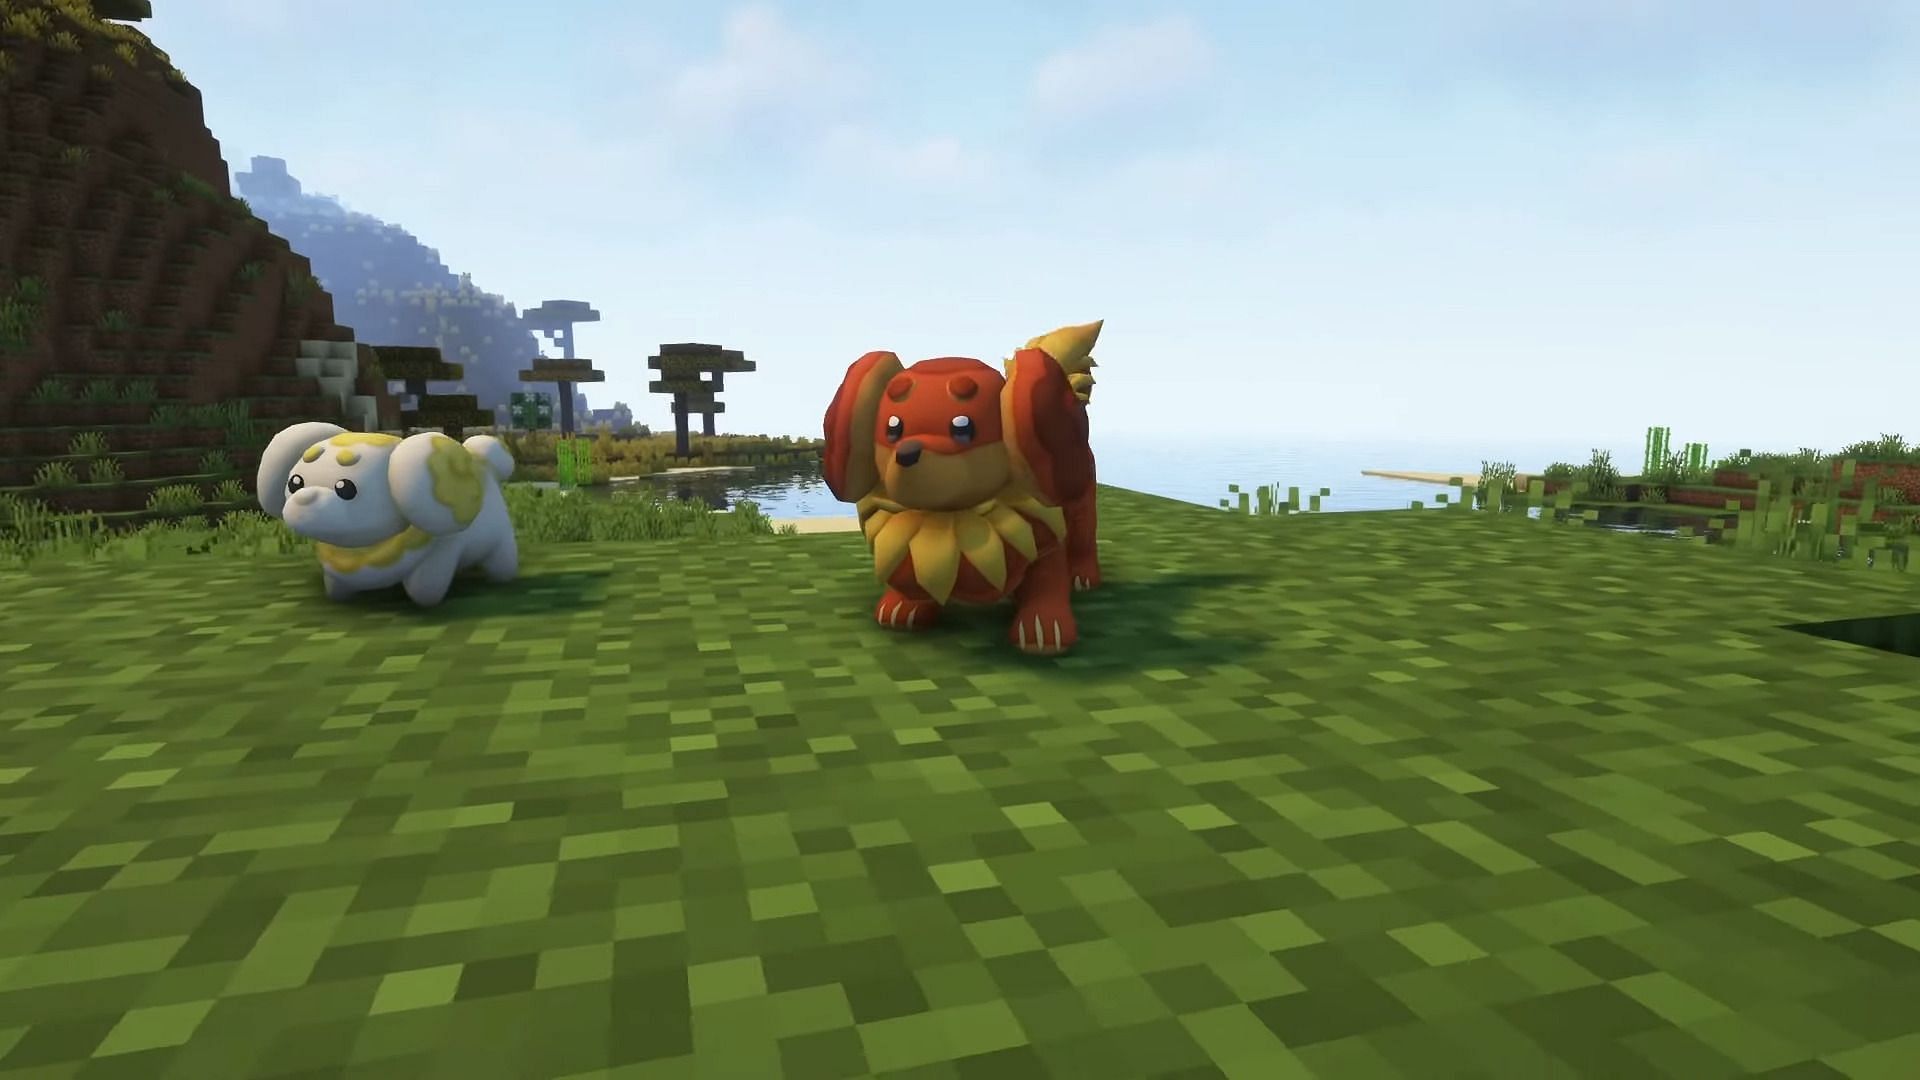 Fidough and Dachsbun in the Pixelmon mod for Minecraft (Image via PixelSnax/YouTube)